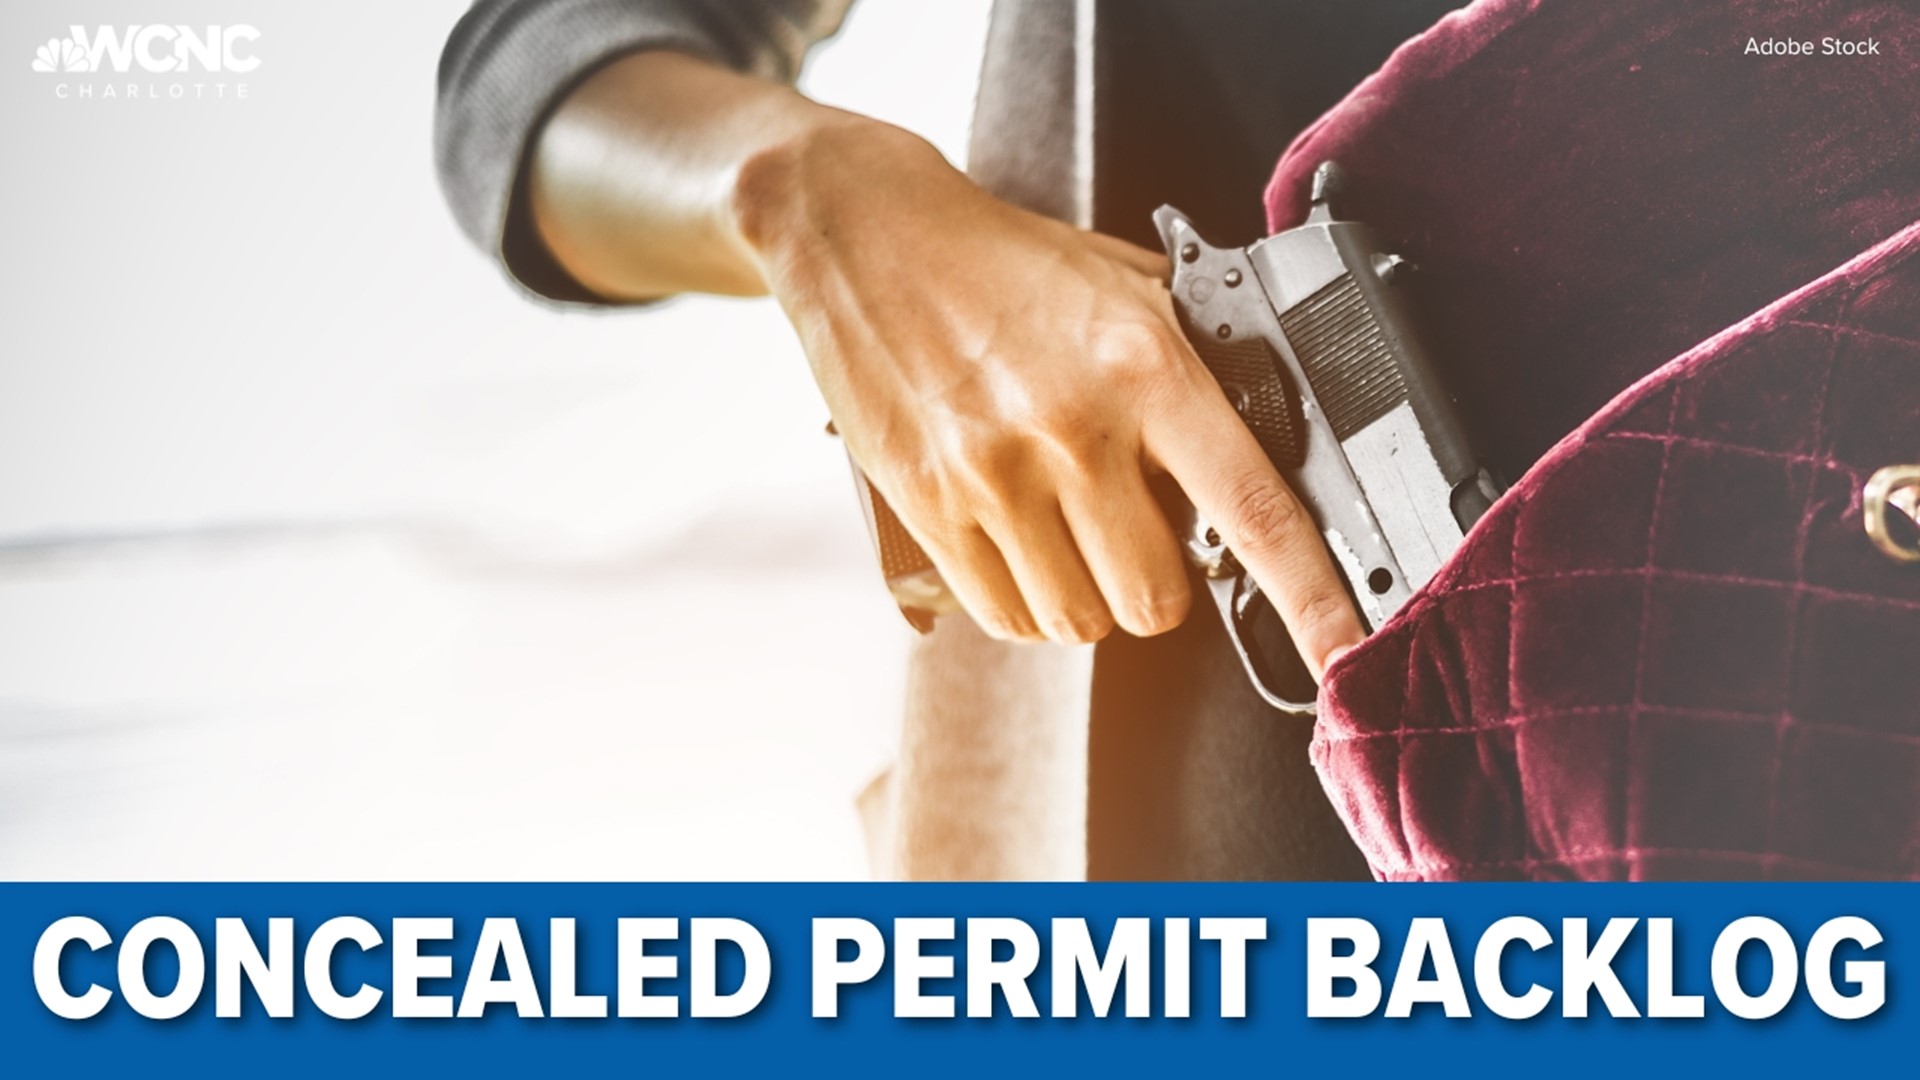 Over 7,000 concealed gun permits are still awaiting approval in Mecklenburg County.